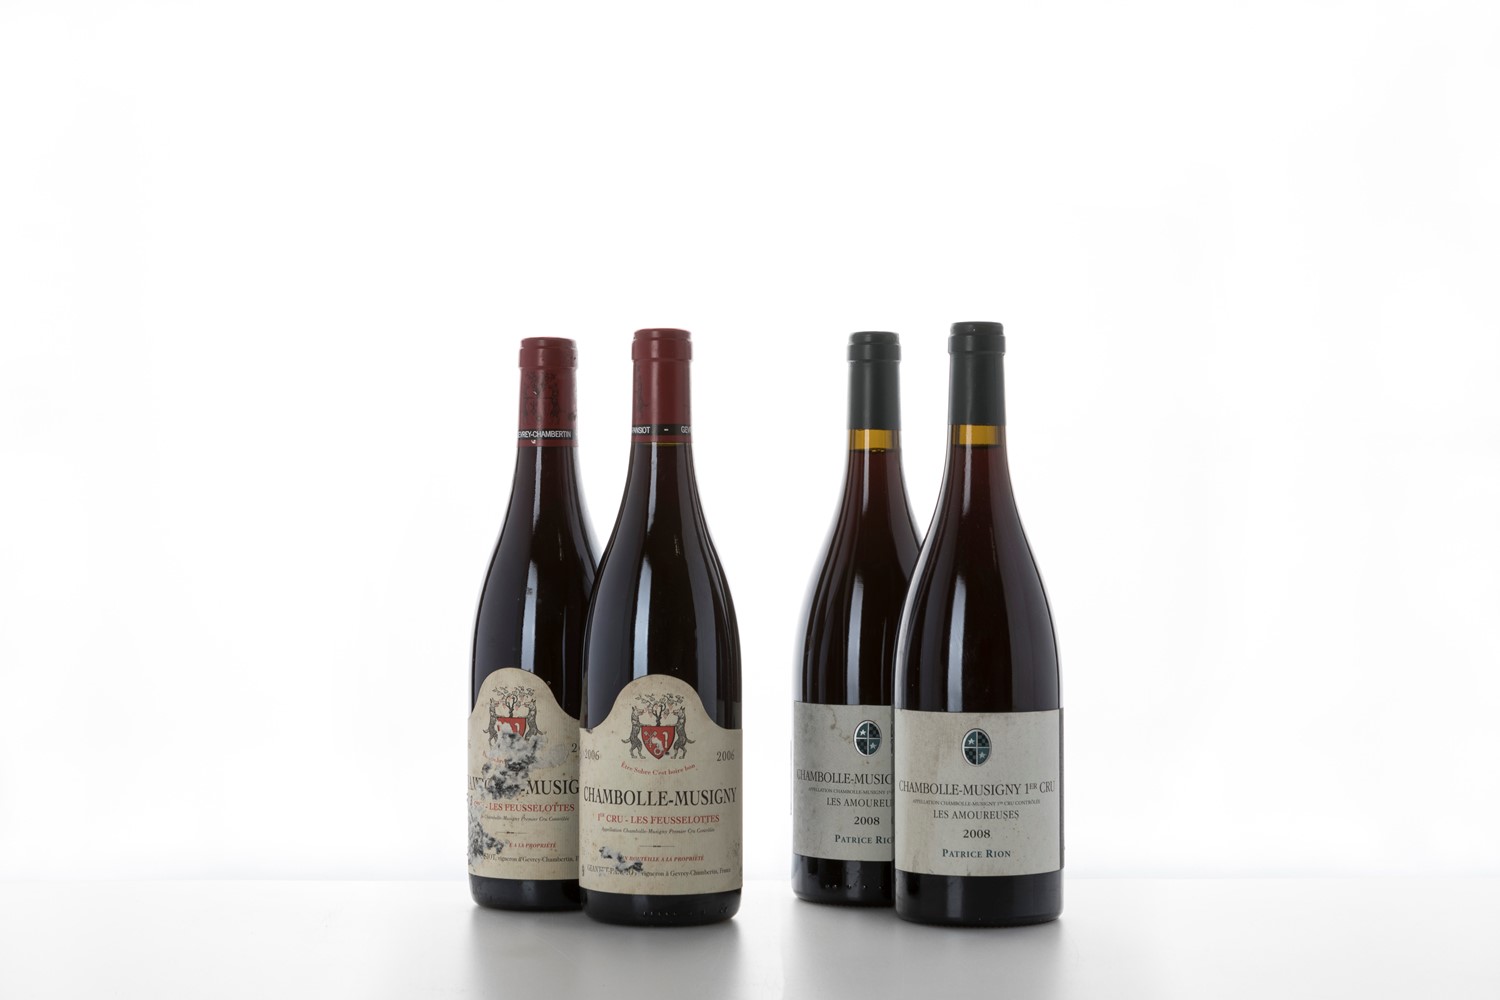 Borgogna / Selection Chambolle Musigny - Francia - Geantet Passiot Chambolle Musigny [...]